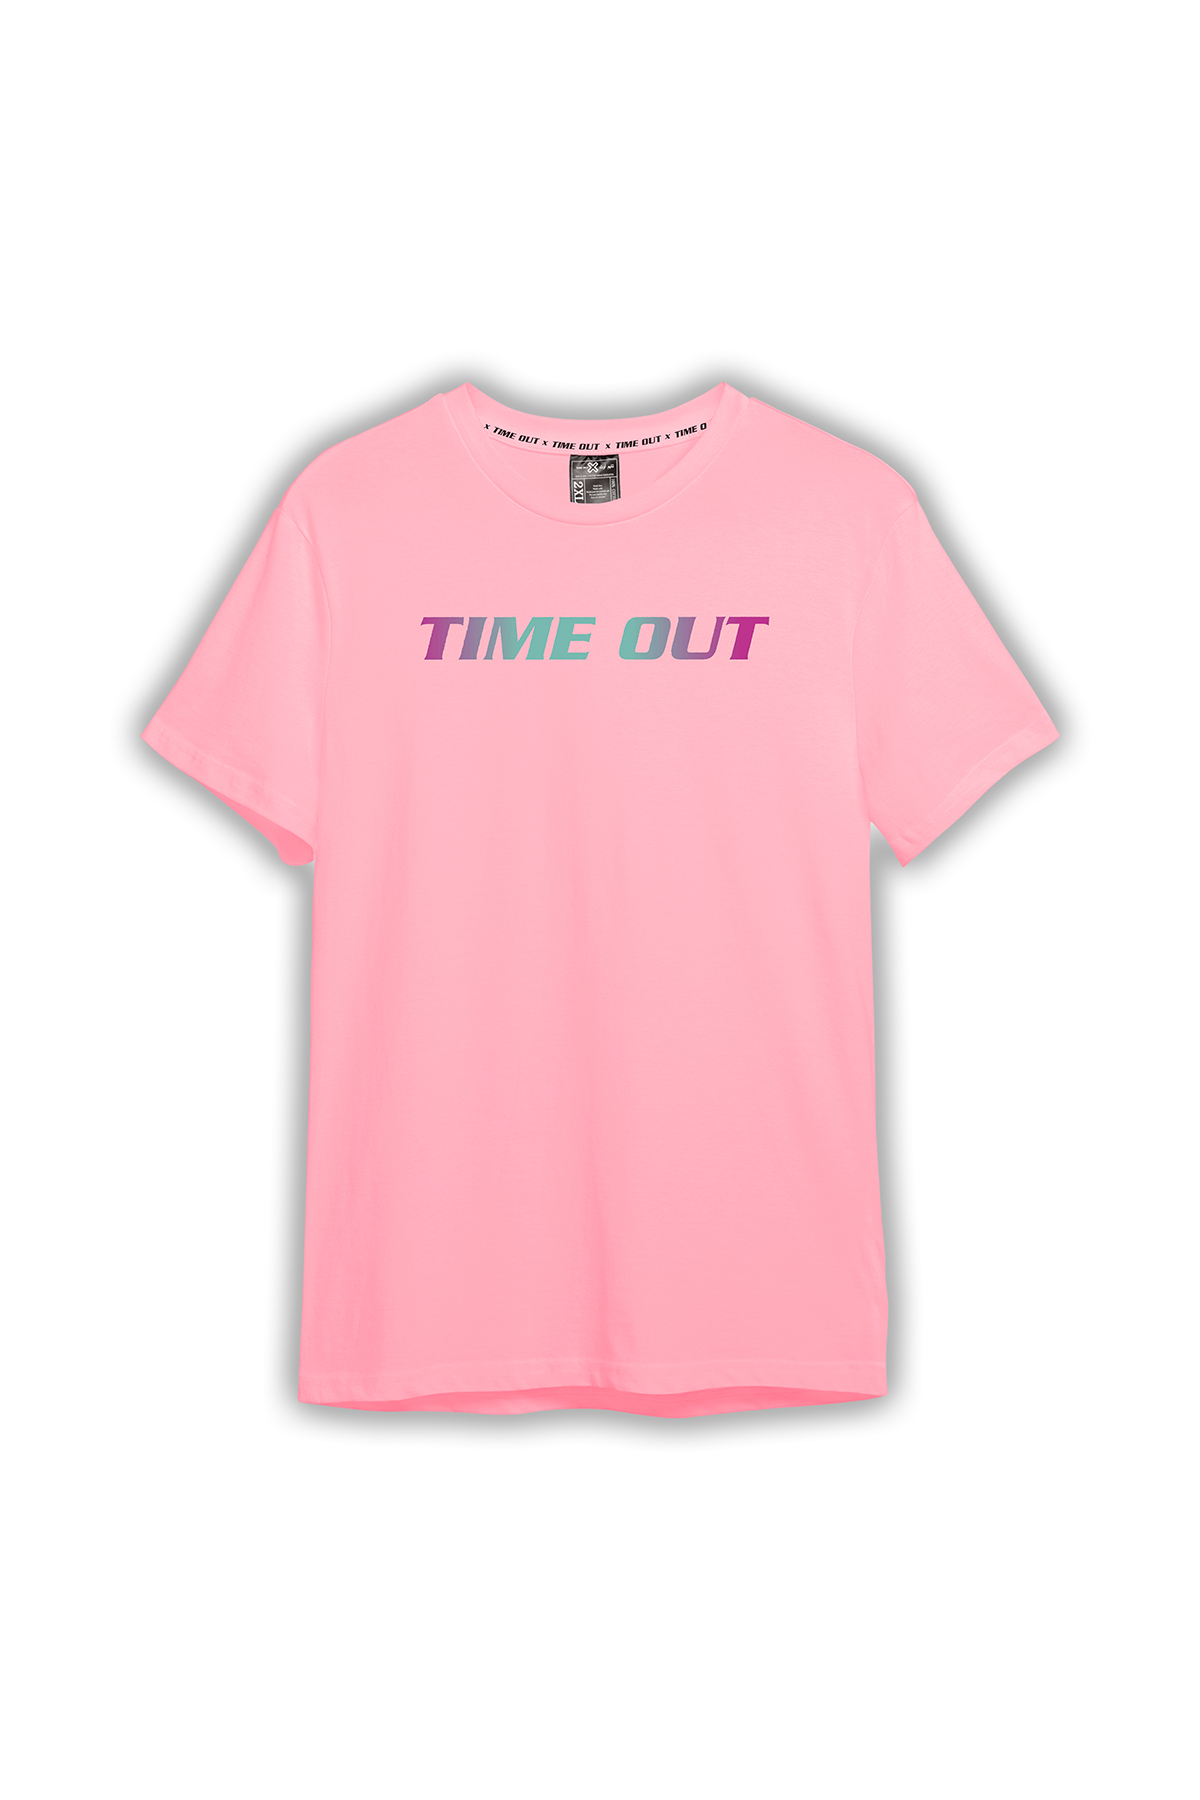 Unisex-Time-Out-X-Signature-Pure-Cotton-Vibrant-Pattern-Pink-T-shirt-for-Kids—Front